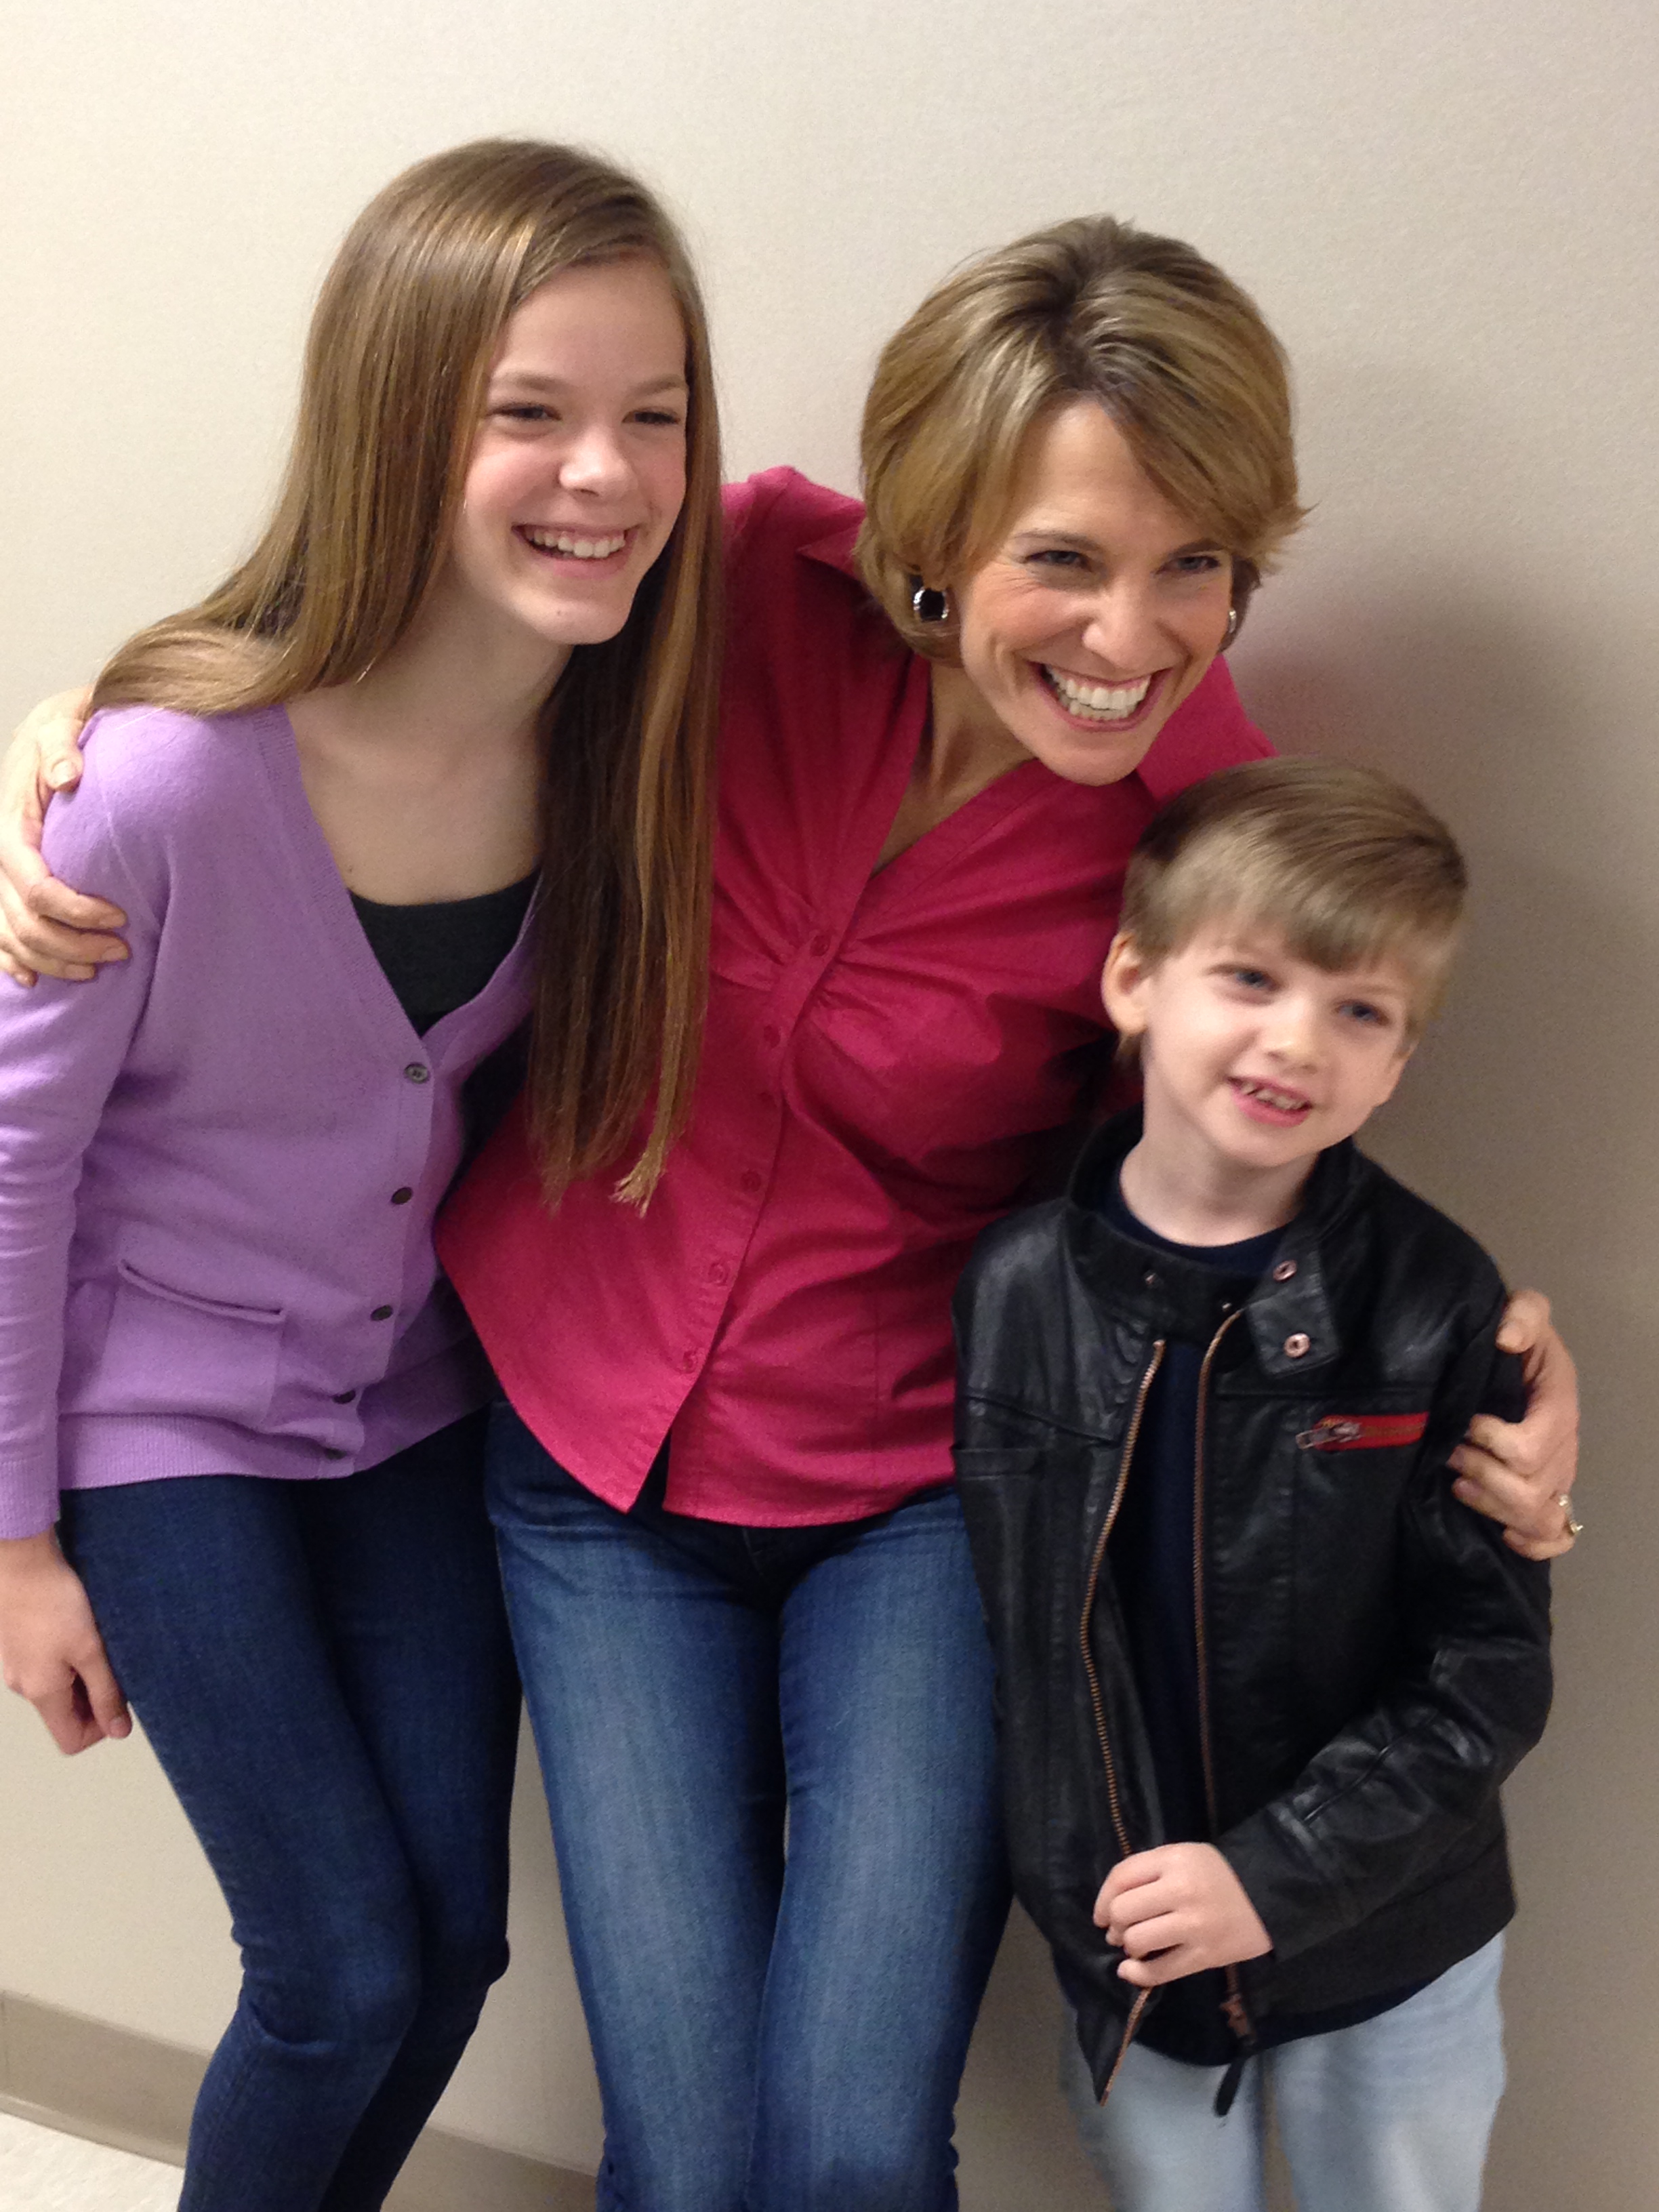 Bronx Murray with Abigail White and Joanne Clendining on the set of Stop & Shop.